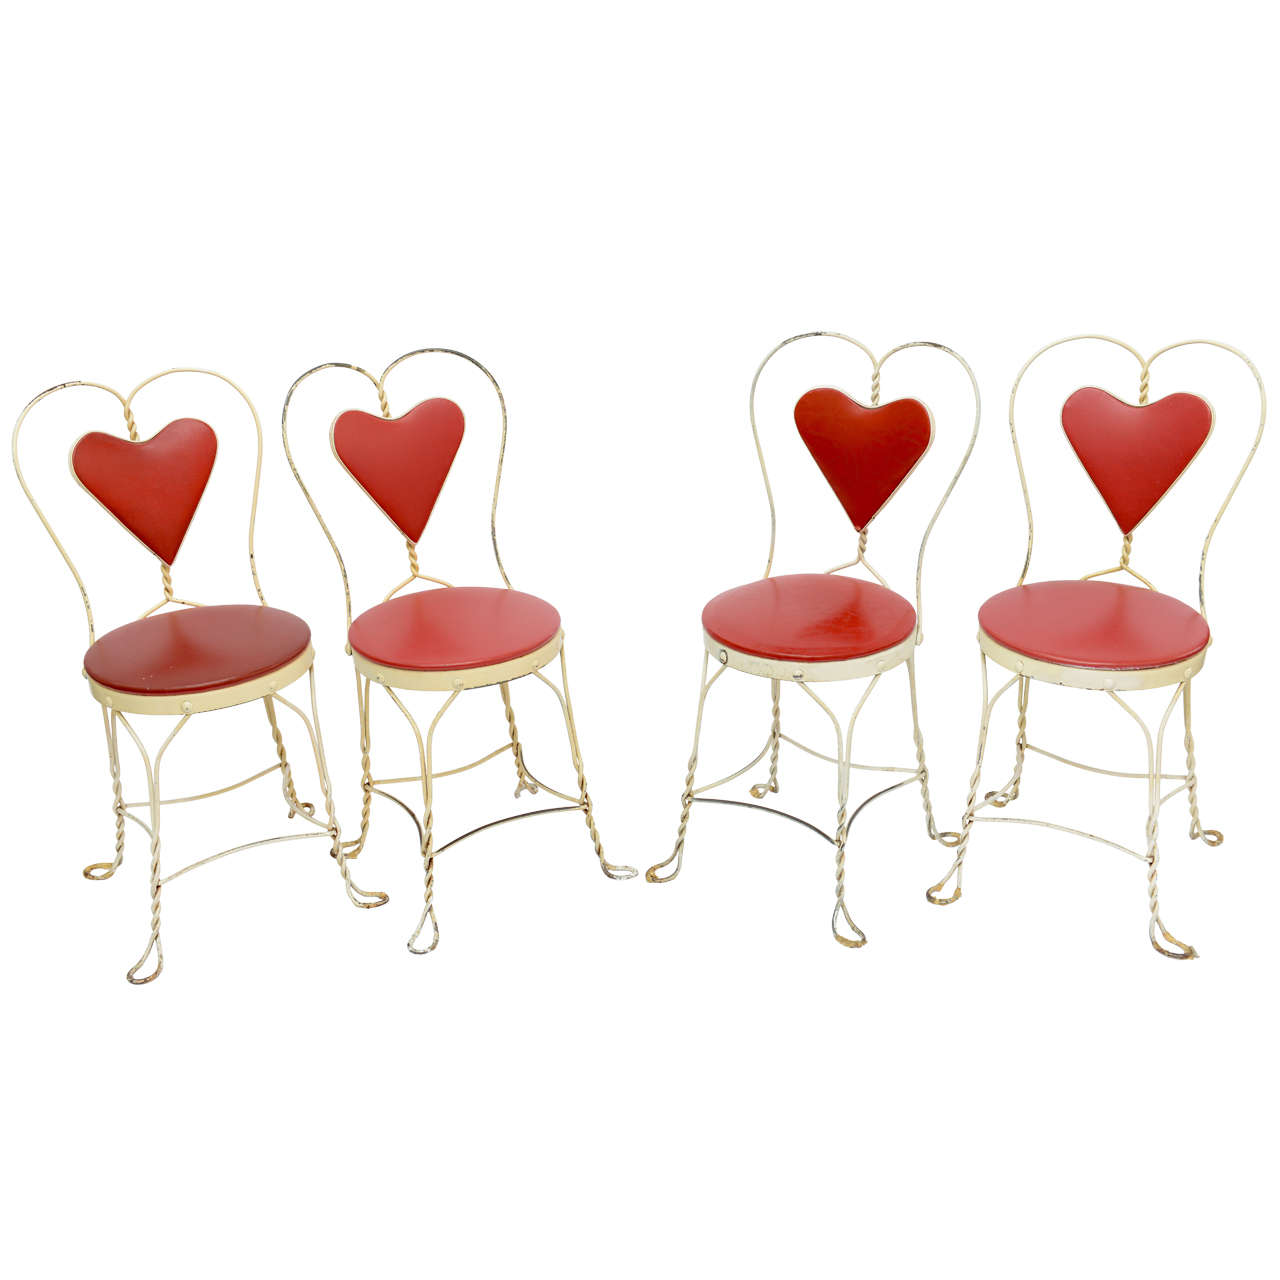 Set of 4 Antique Ice Cream Parlor Chairs